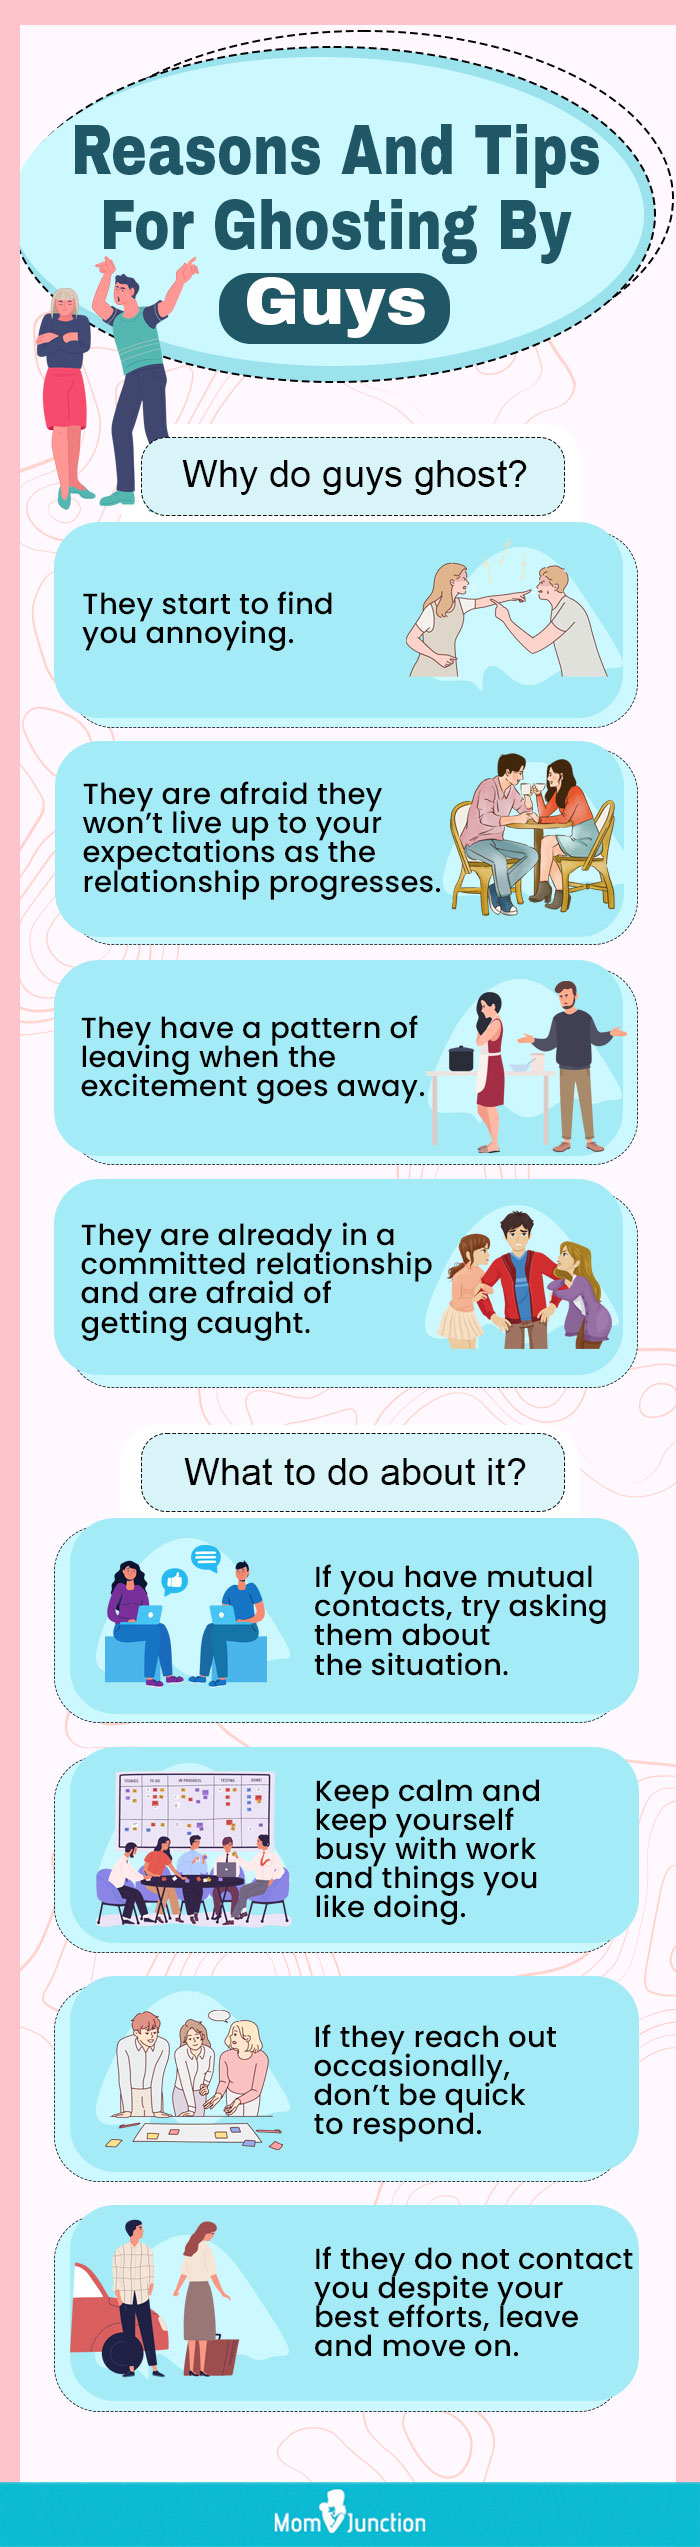 why men ghost women to help you get closure and tips [infographic]